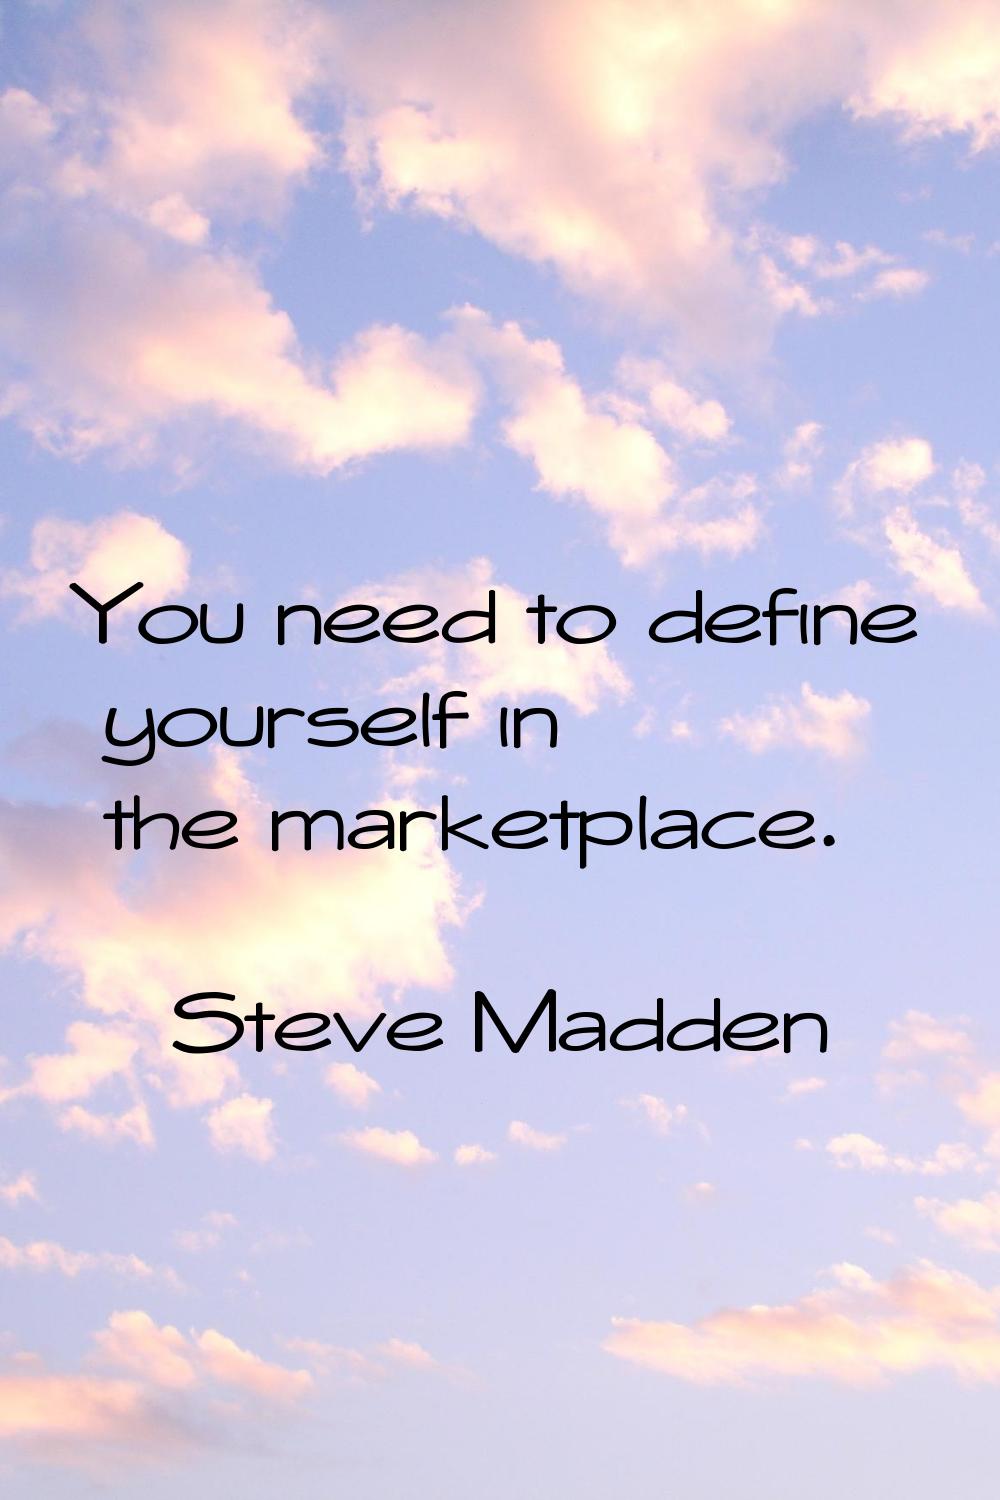 You need to define yourself in the marketplace.